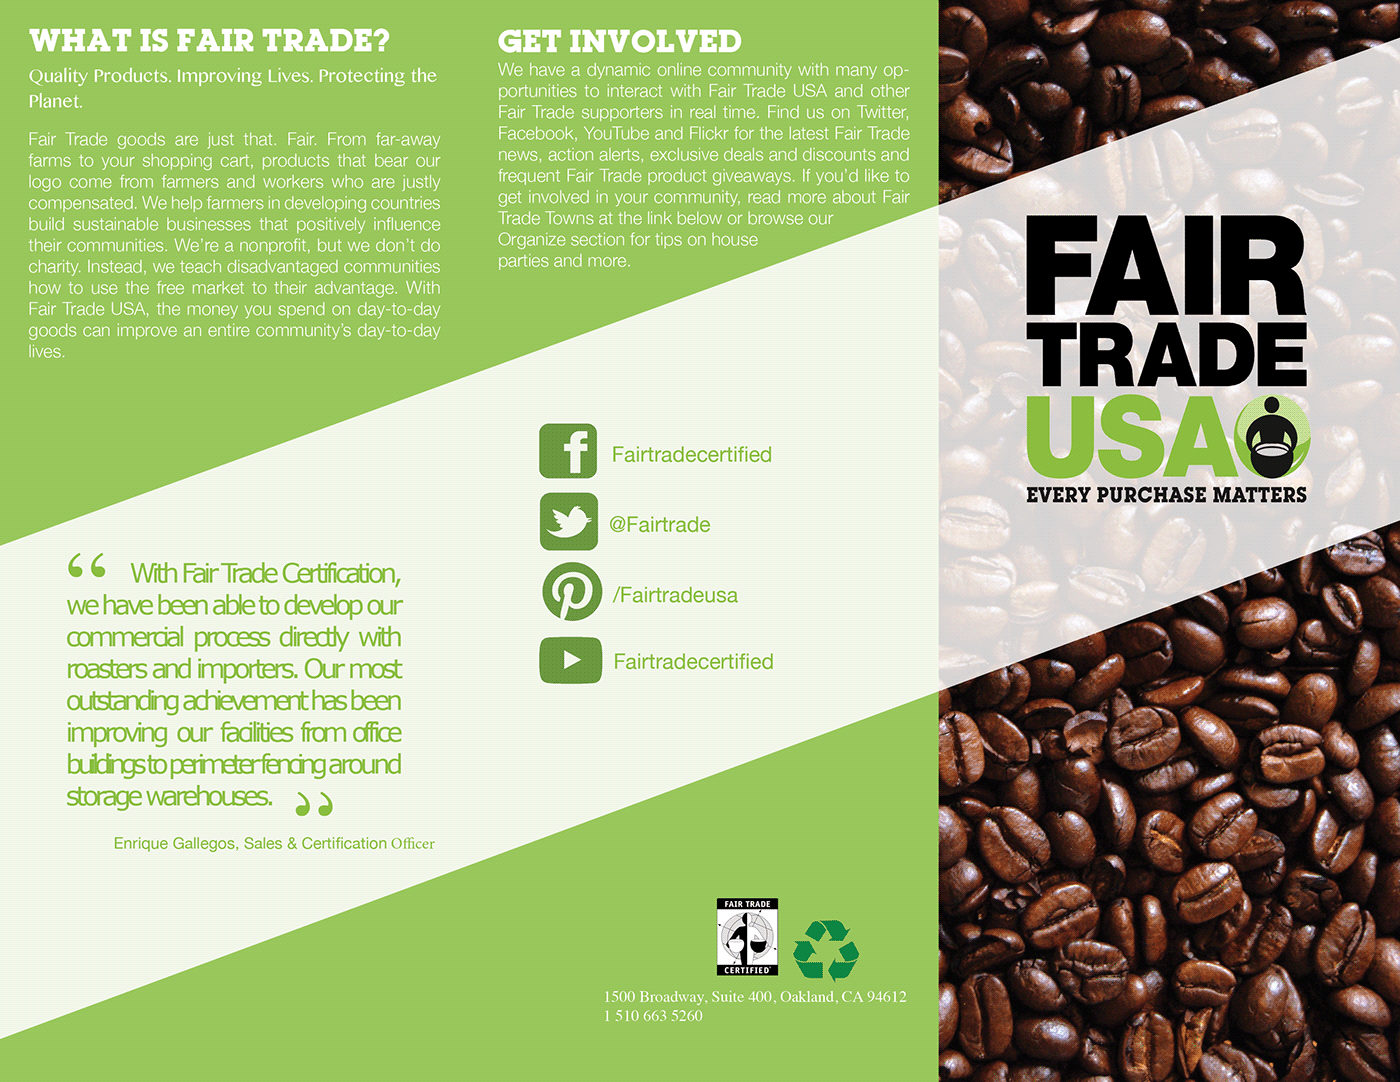 Is that shop new. Fairtrade products. Fair trade products. Fair trade маркировка. Fairtrade products в России.